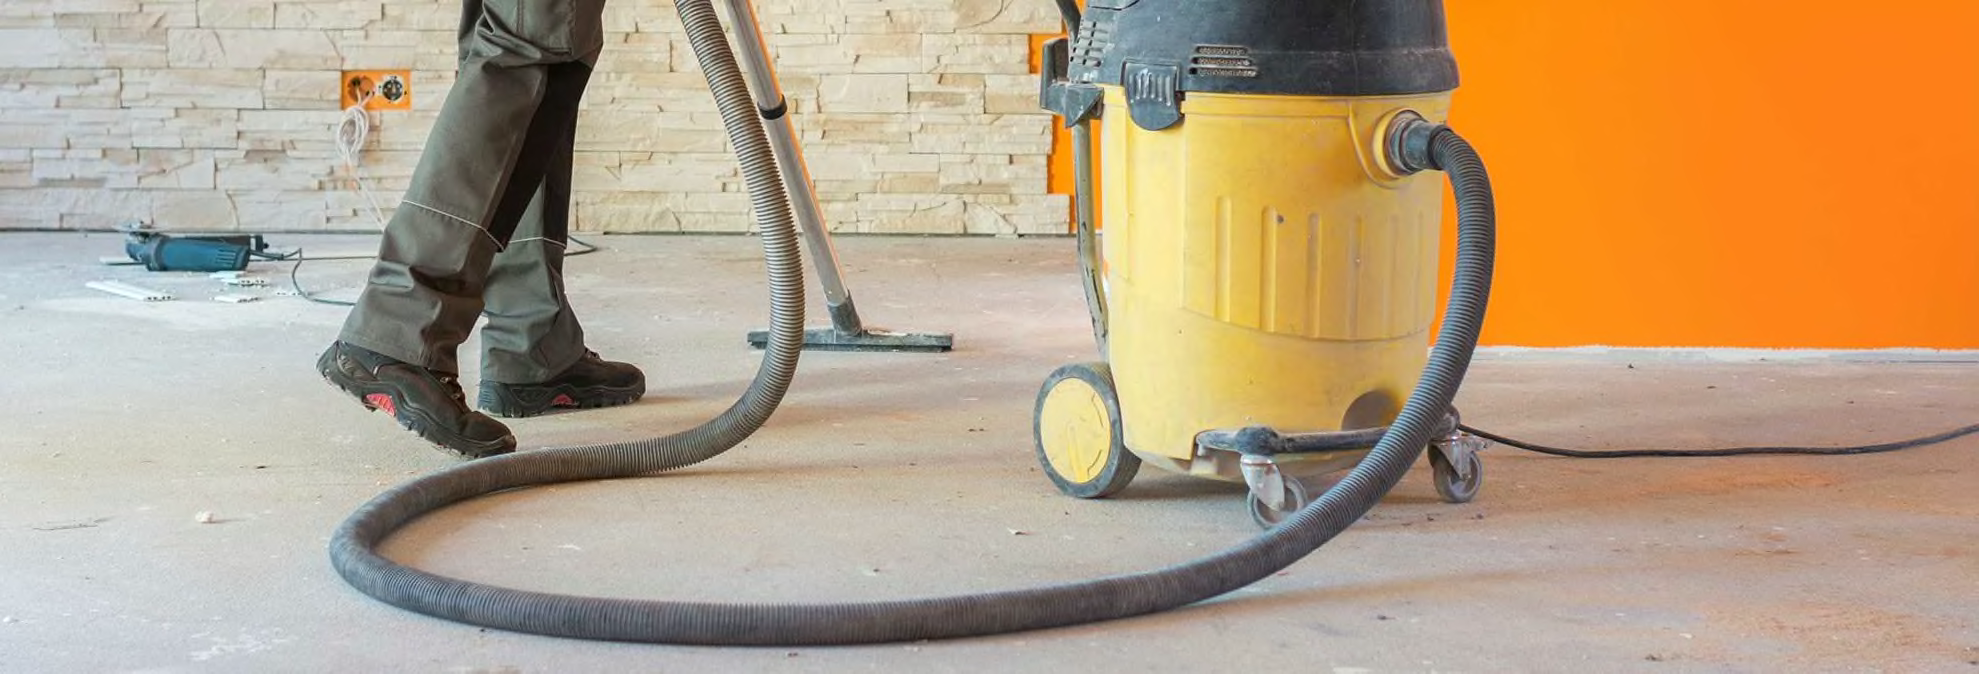 How To Use A Shop Vac To Vacuum Up Fiberglass Insulation the following rather: As you might tell from|distinguish} our suggestions, we actually like cordless stop vacs for automobile use.</p>
<h3 id=